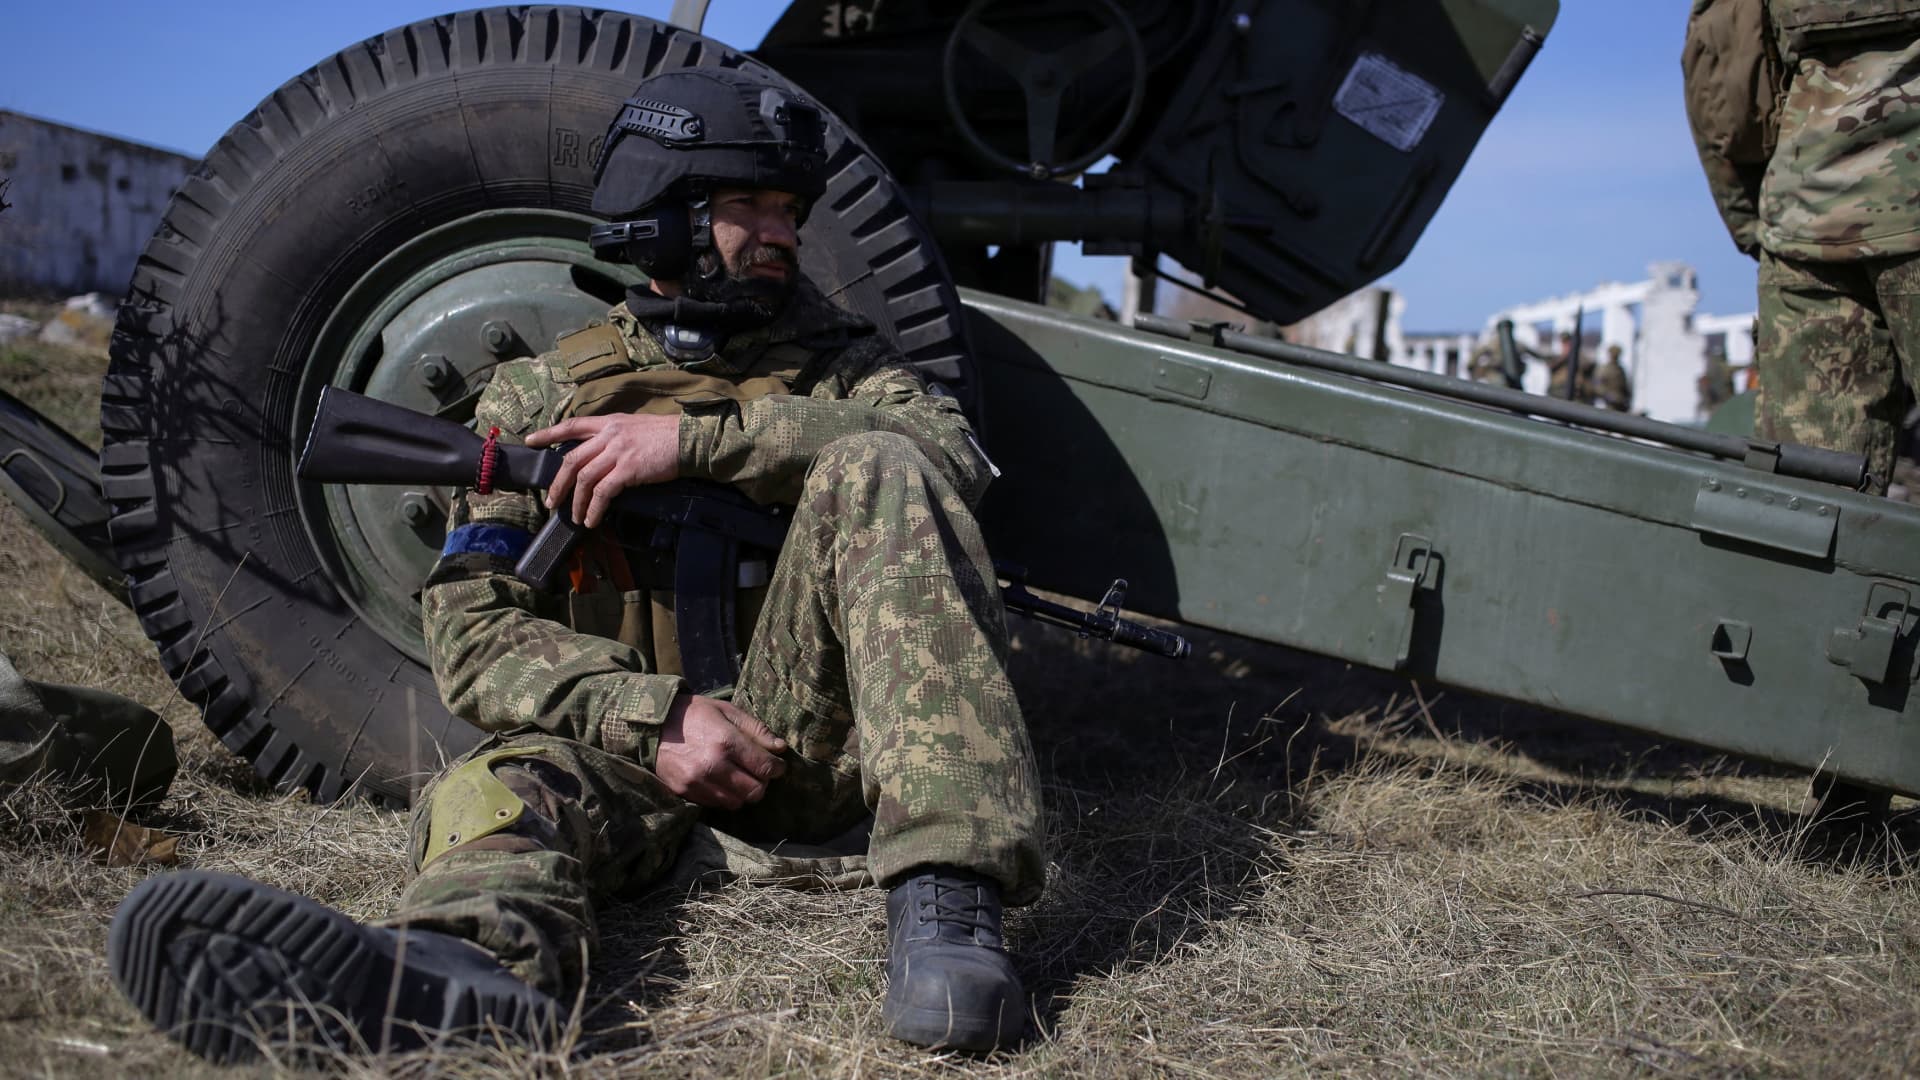 A member of the Ukrainian Volunteer Corps rests next to a howitzer, as Russia's attack on Ukraine continues, at a position in Zaporizhzhia region, Ukraine March 28, 2022. Picture taken March 28, 2022. 